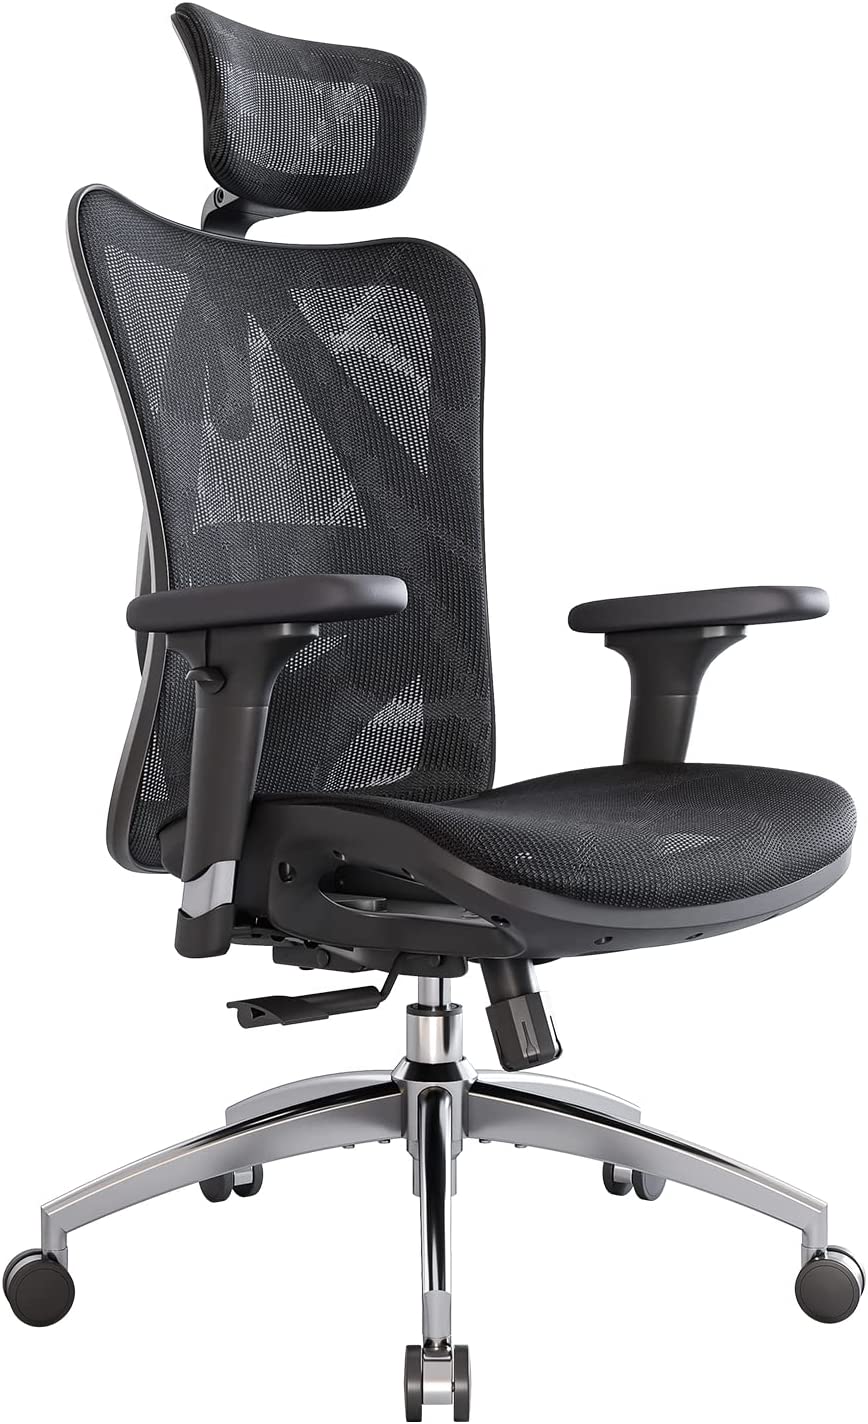 SIHOO M57 Ergonomic Office Chair with 3 Way Armrests [...]